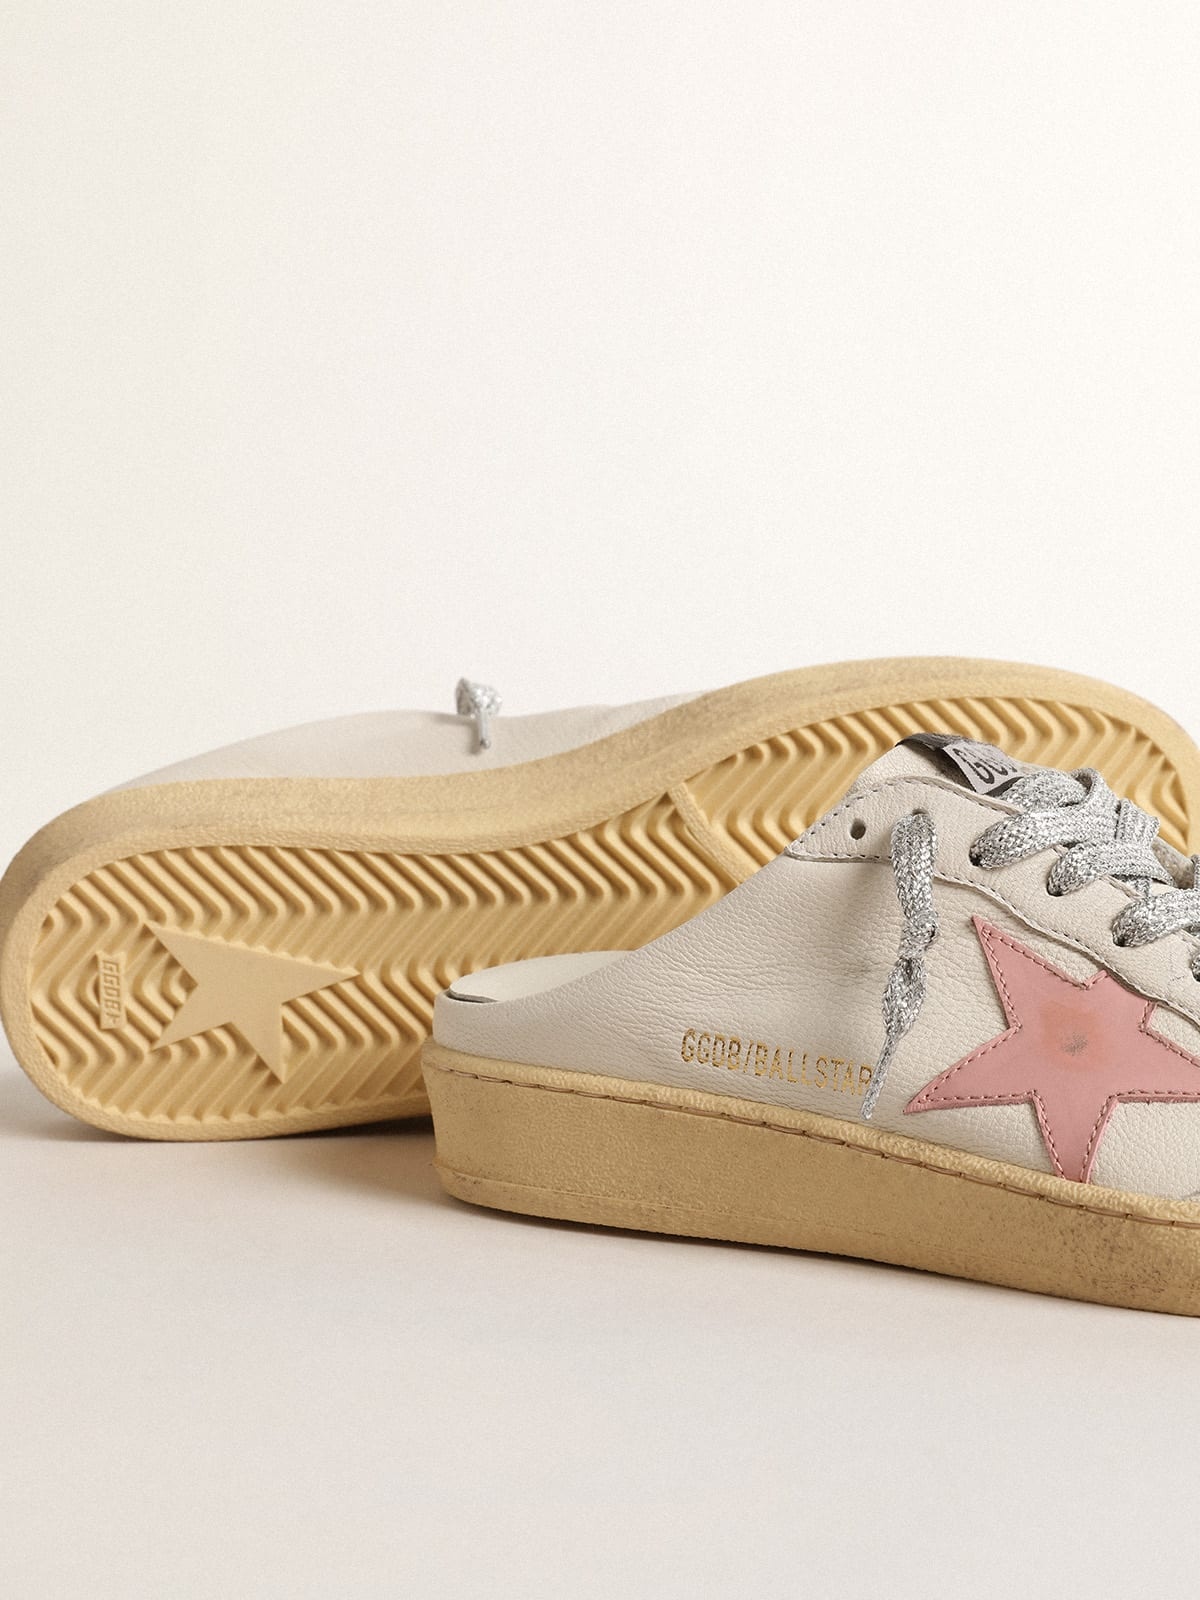 Ball Star Sabots in white nappa with an old-rose leather star - 3